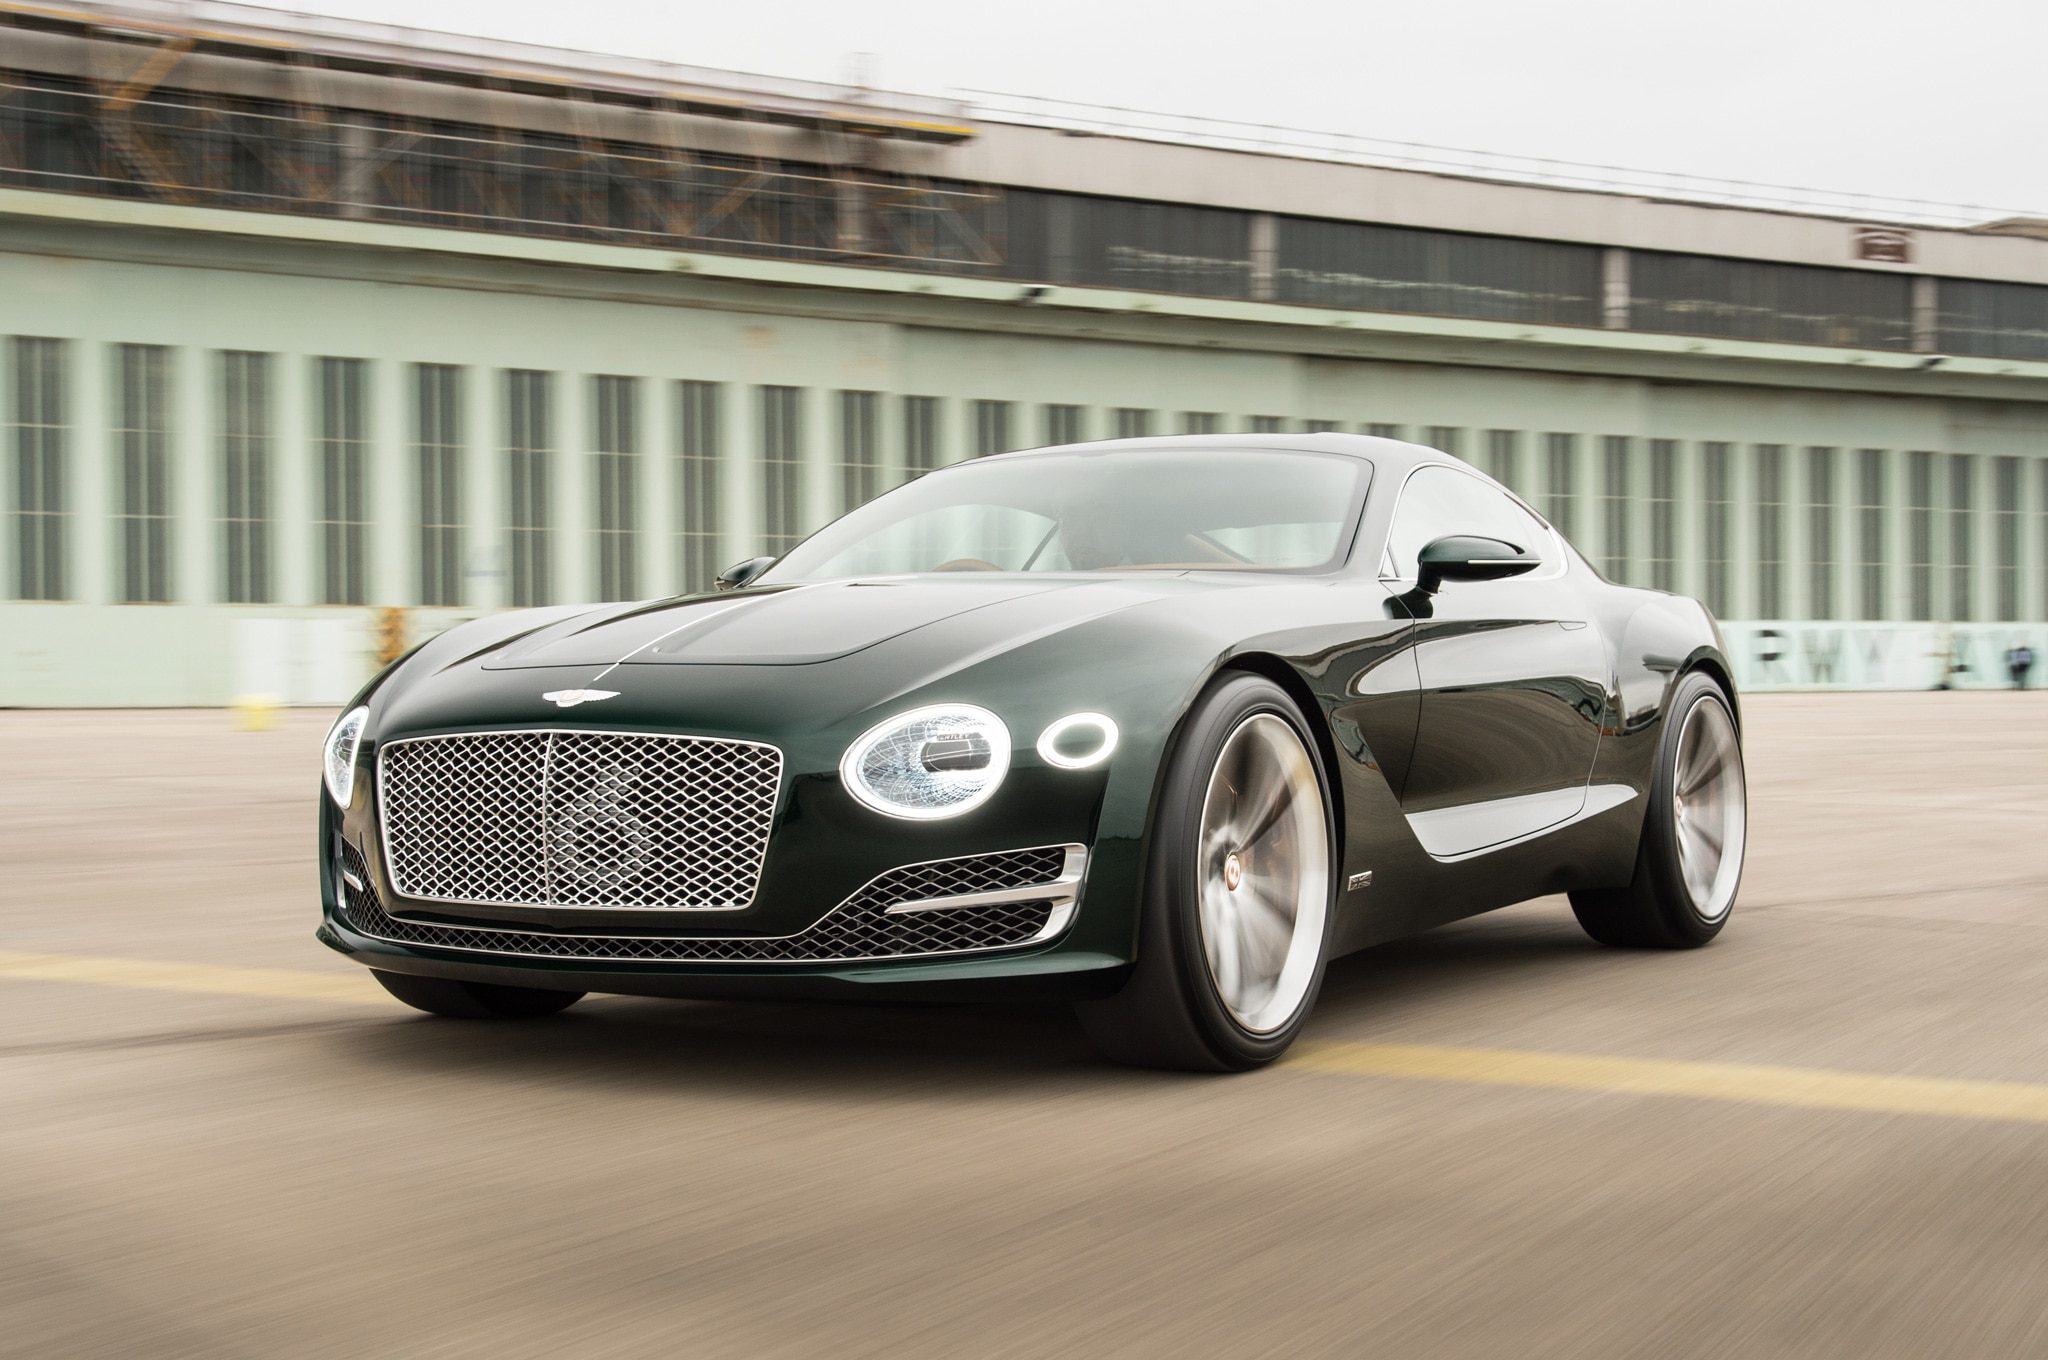 Bentley-EXP-10-Speed-6-concept-front-three-quarter-in-motion-07.jpg